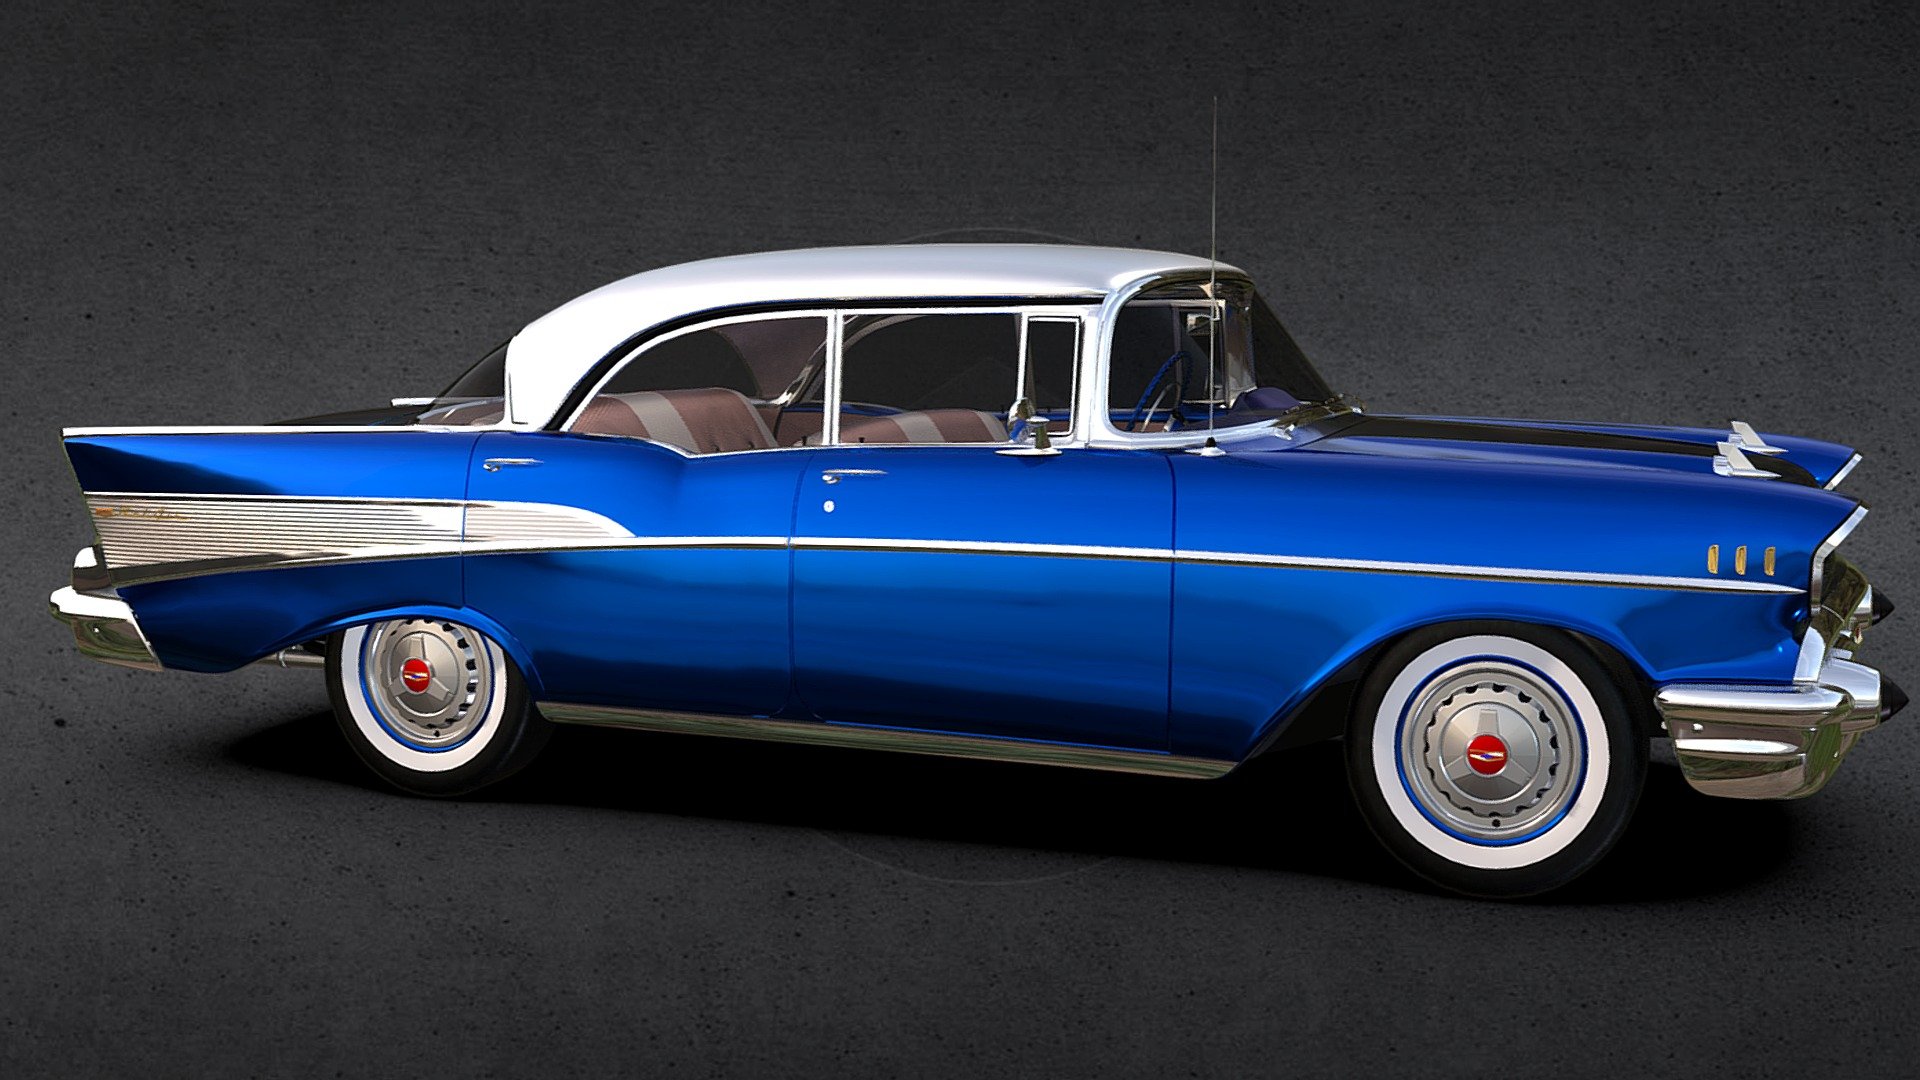 Model is available for 40 EUR
If you want purchase chevy 4-door 3d model please touch me at: everhardmail@gmail.com - 1957 Chevrolet Bel Air 4-Door Hardtop Sedan - 3D model by everhard 3d model